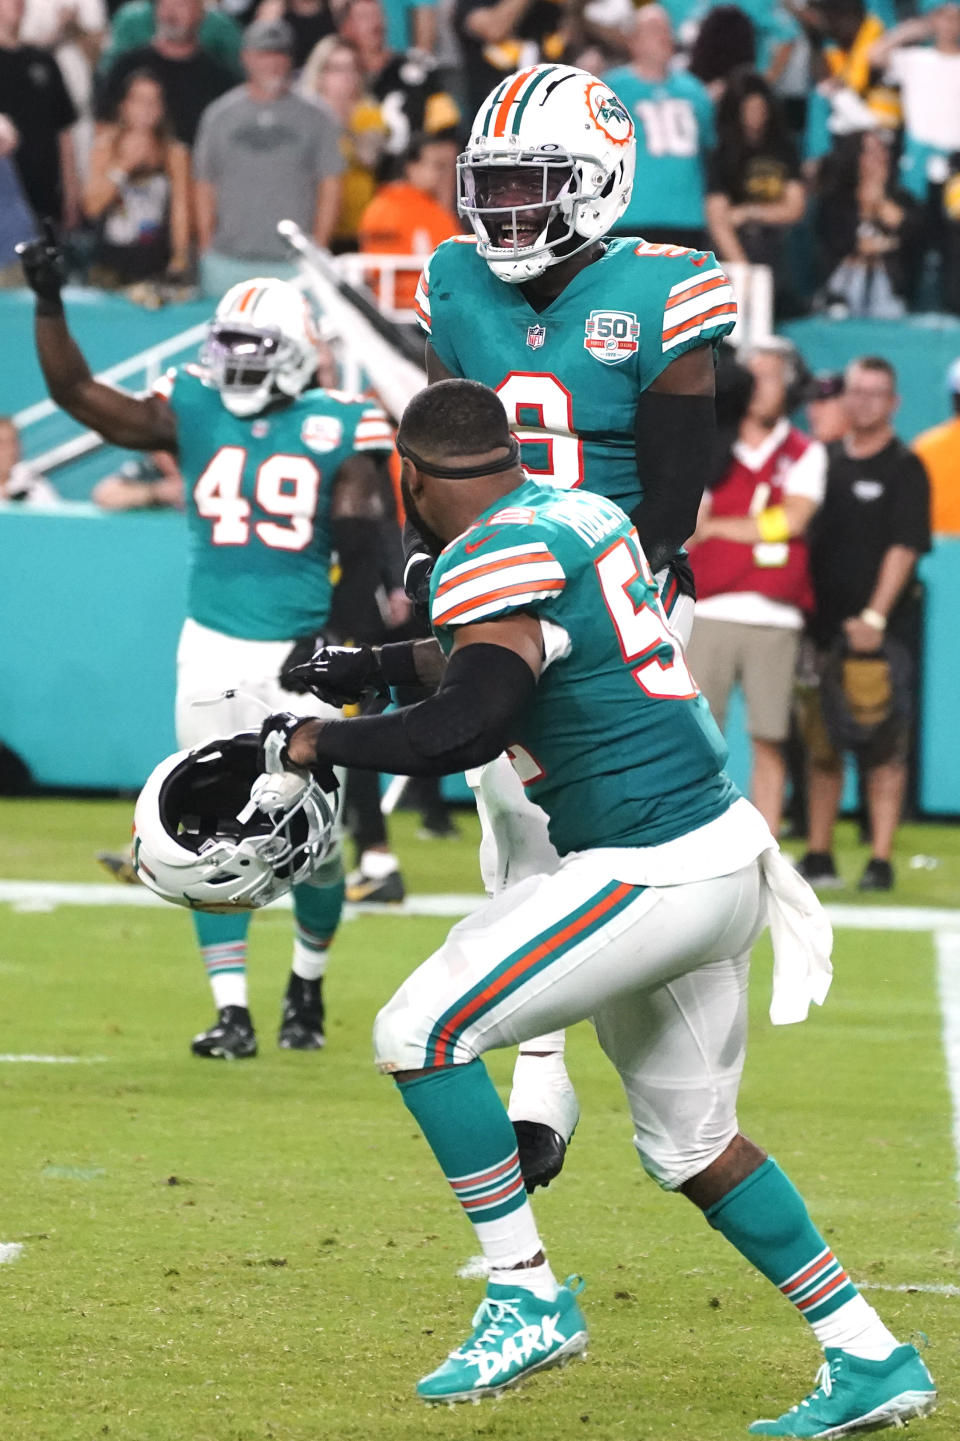 Miami Dolphins cornerback Noah Igbinoghene (9) celebrates after intercepting a pass during the second half of an NFL football game against the Pittsburgh Steelers, Sunday, Oct. 23, 2022, in Miami Gardens, Fla. The Dolphins defeated the Steelers 16-10. (AP Photo/Wilfredo Lee )